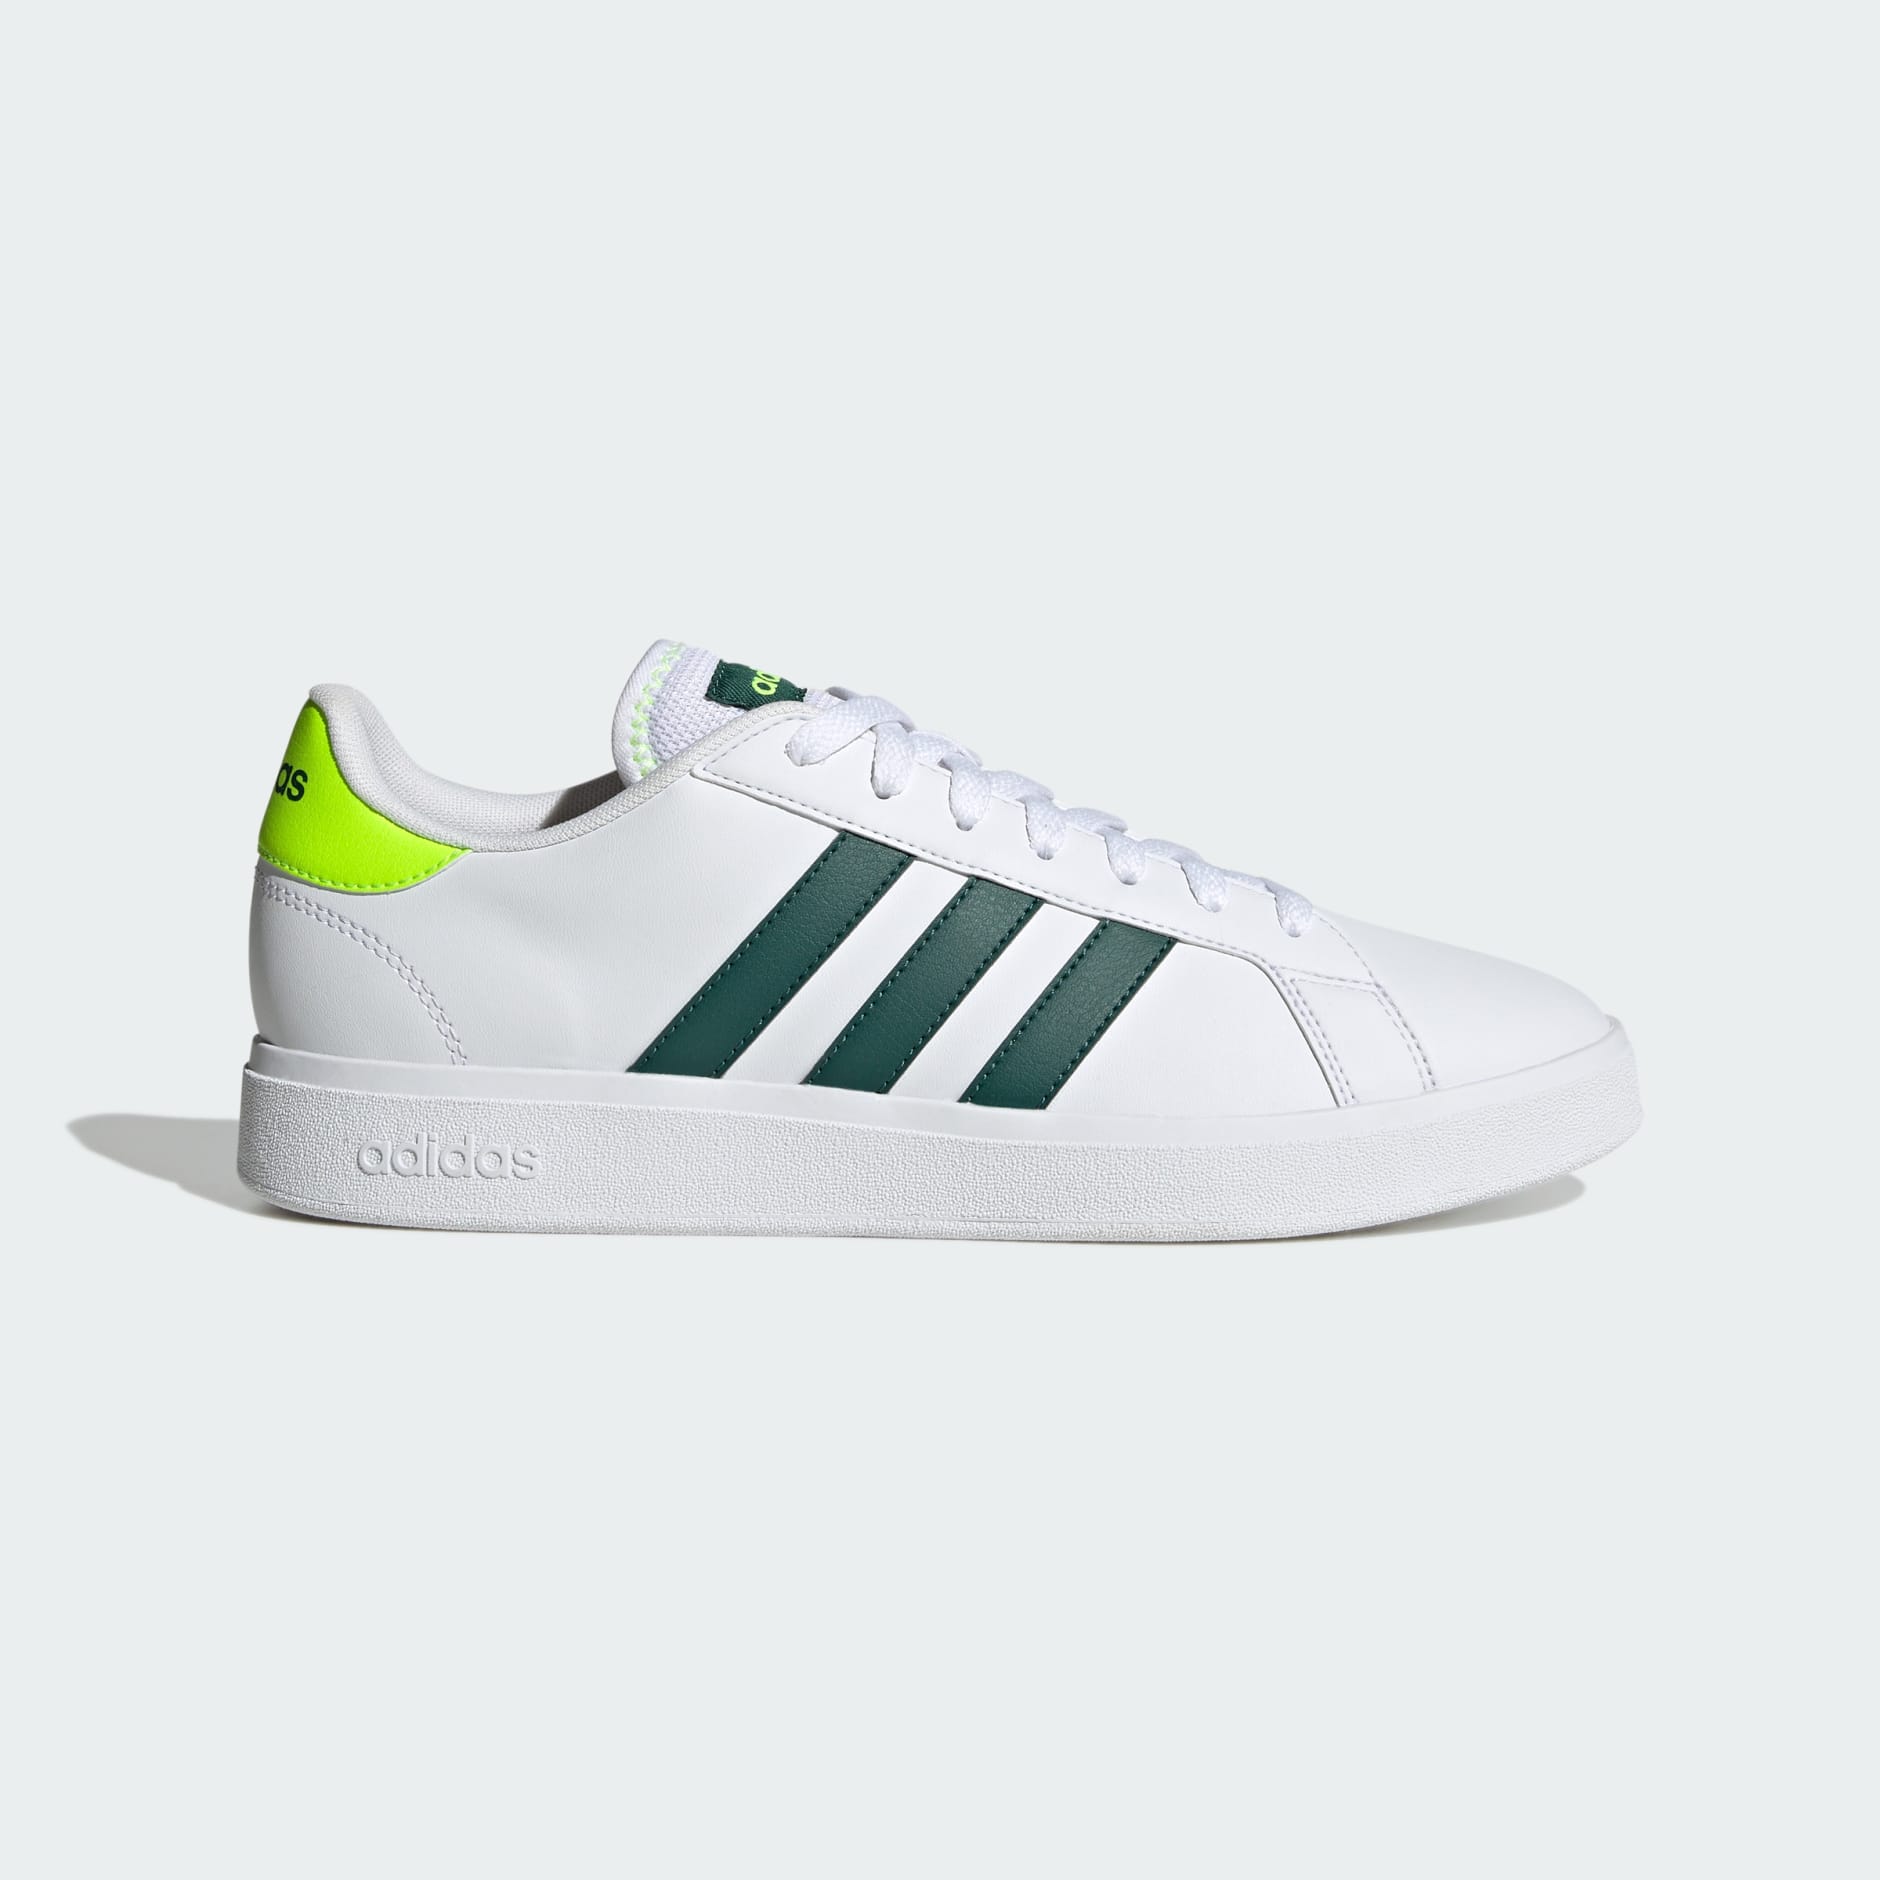 Shoes - Grand Court TD Lifestyle Court Casual Shoes - White | adidas ...